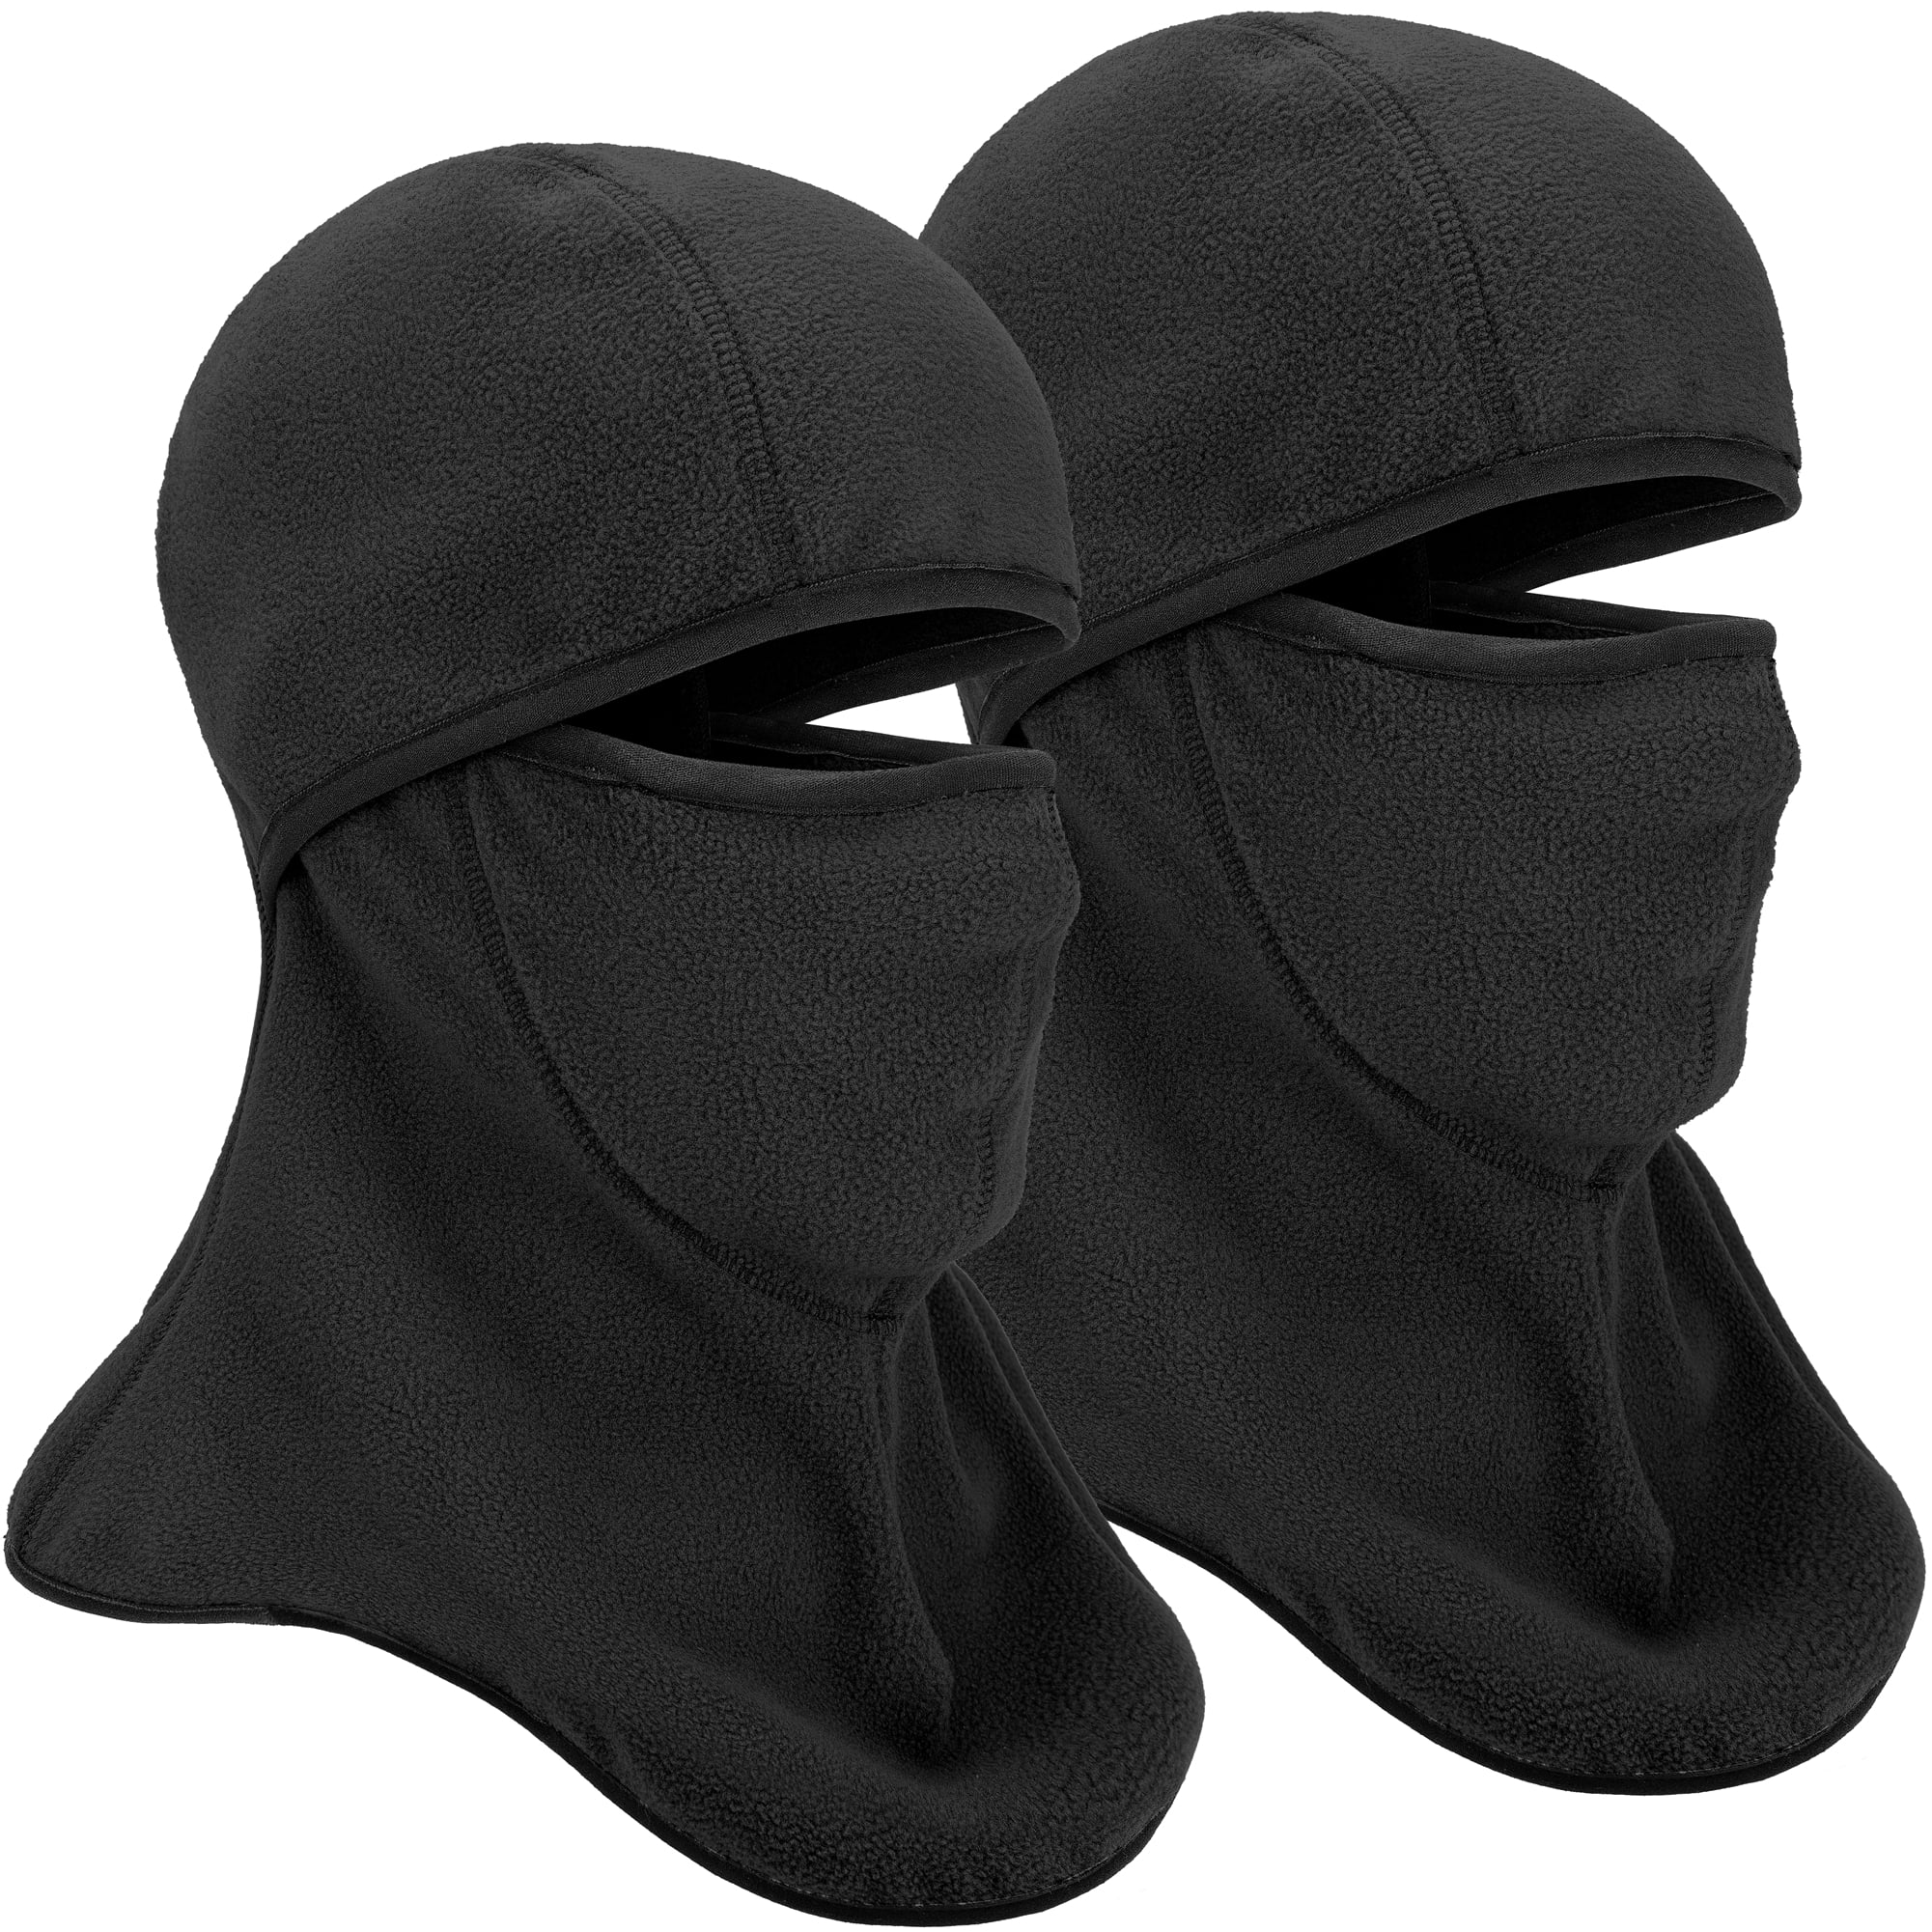 EINSKEY Fleece Ski Mask with Nose Wire, 2-Pack Winter Full Face Mask ...